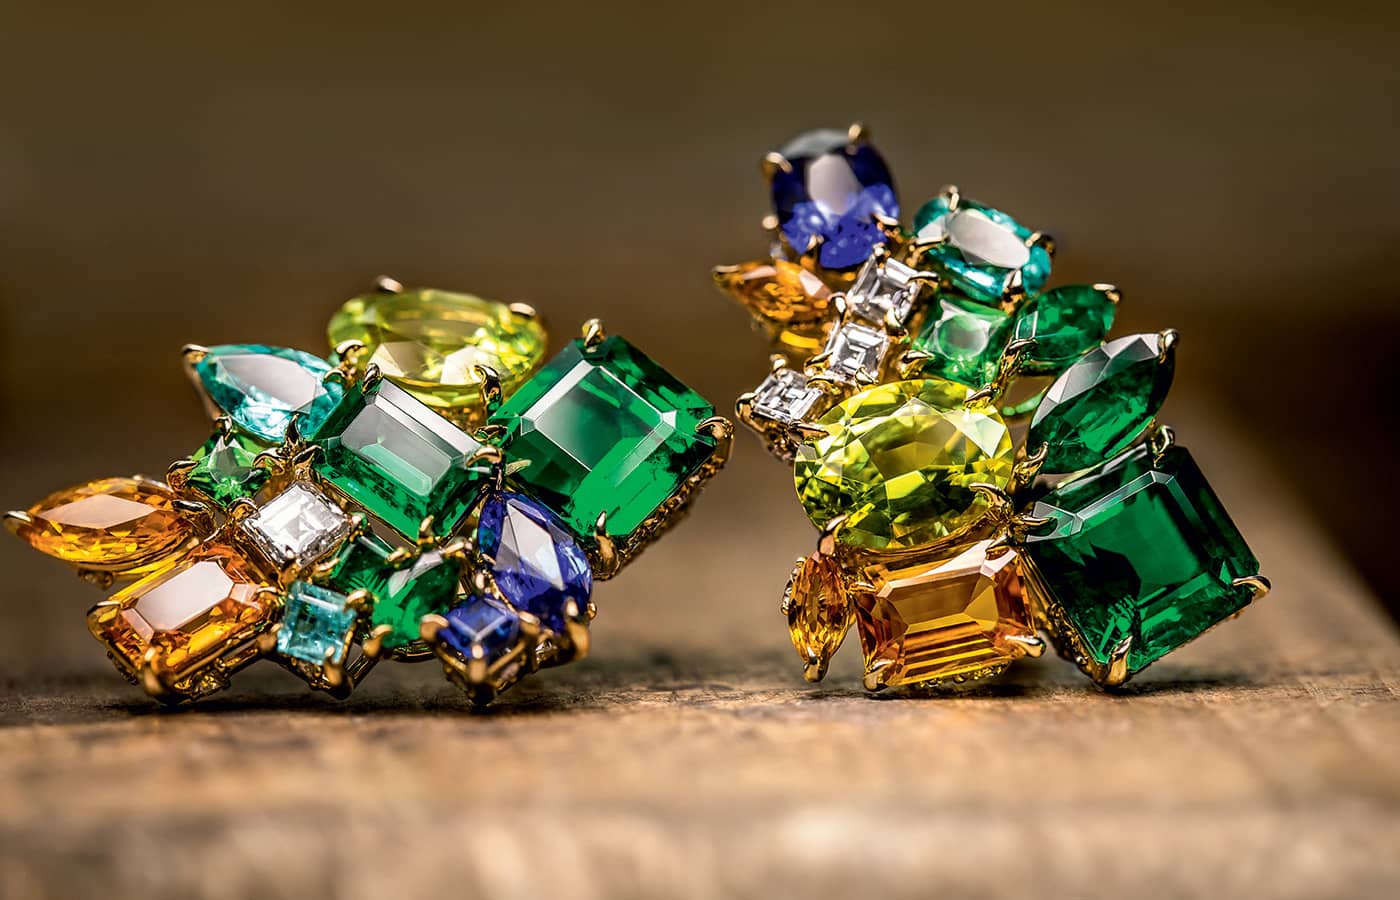 Dior Joaillerie earrings in yellow gold and precious coloured gemstones from the Dearest Dior High Jewellery collection